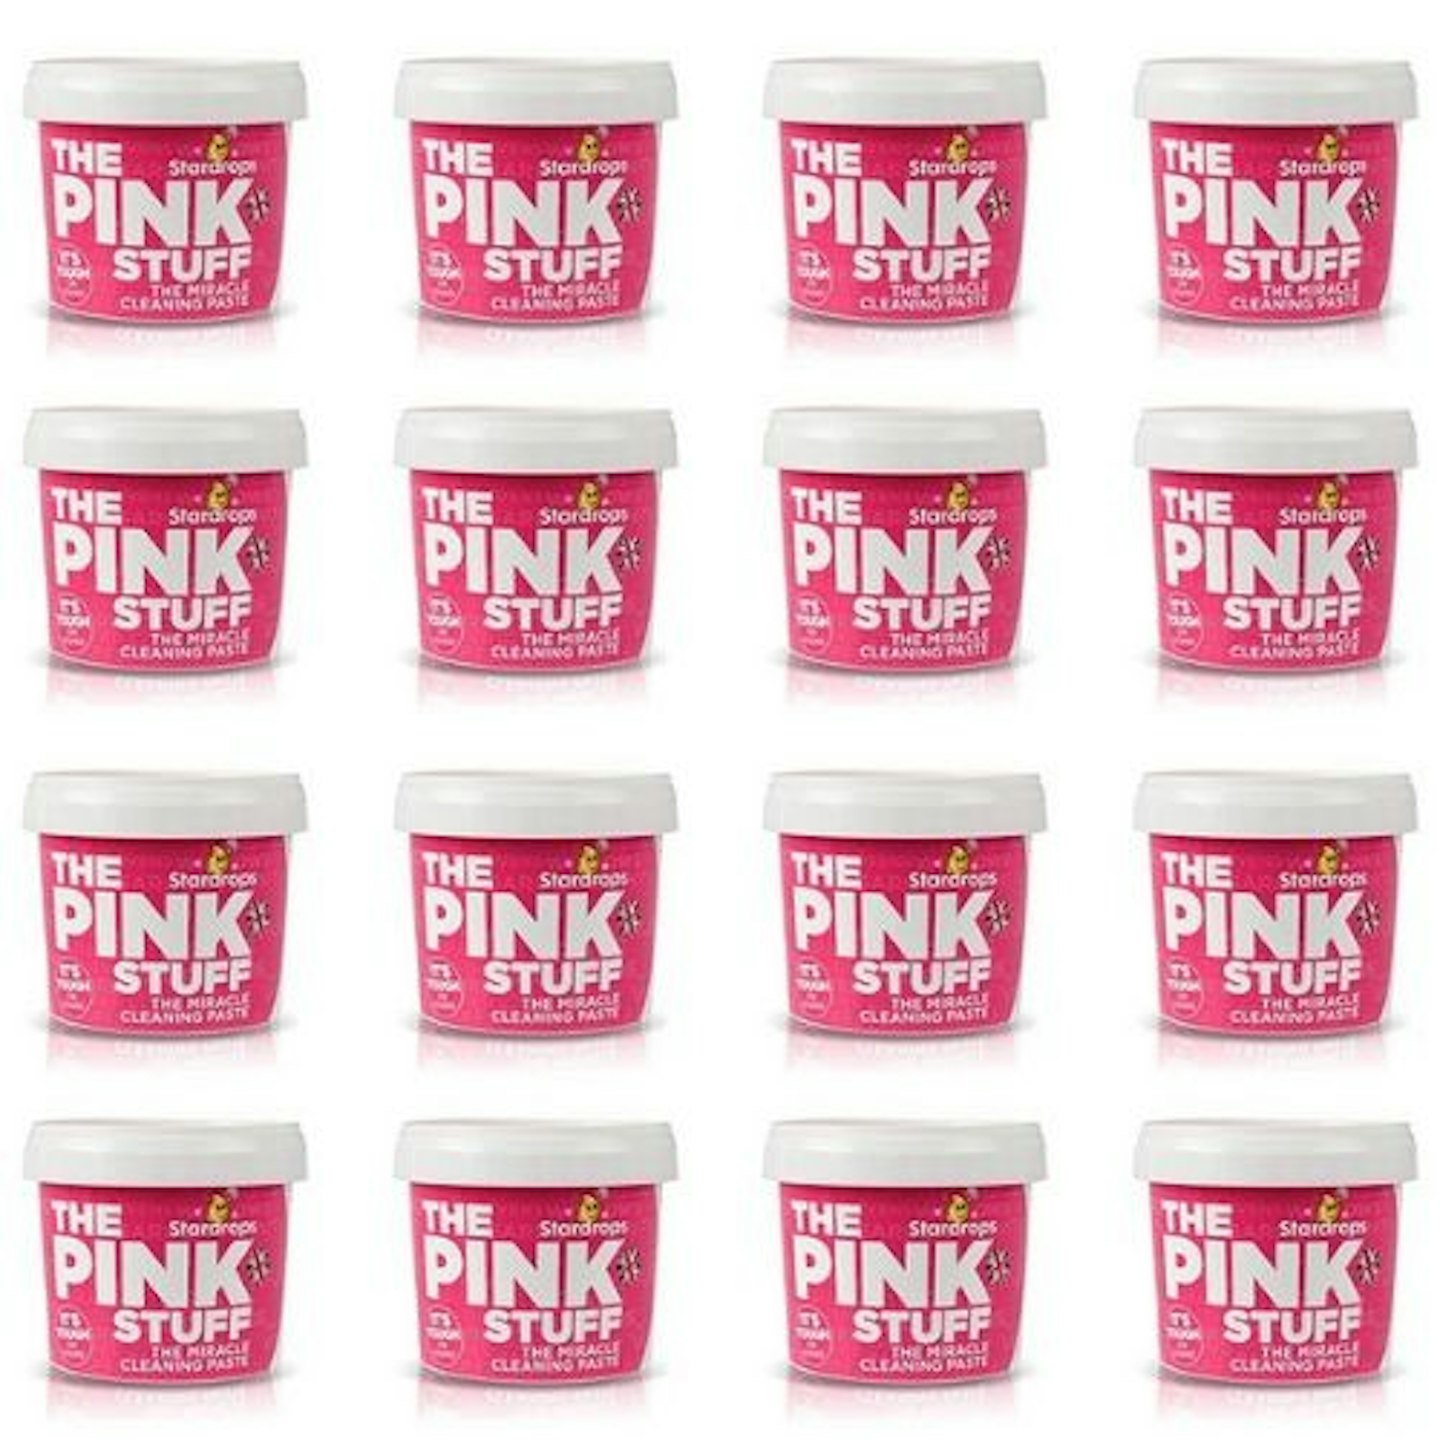 The Pink Stuff Cleaning Paste 500g - Case of 12